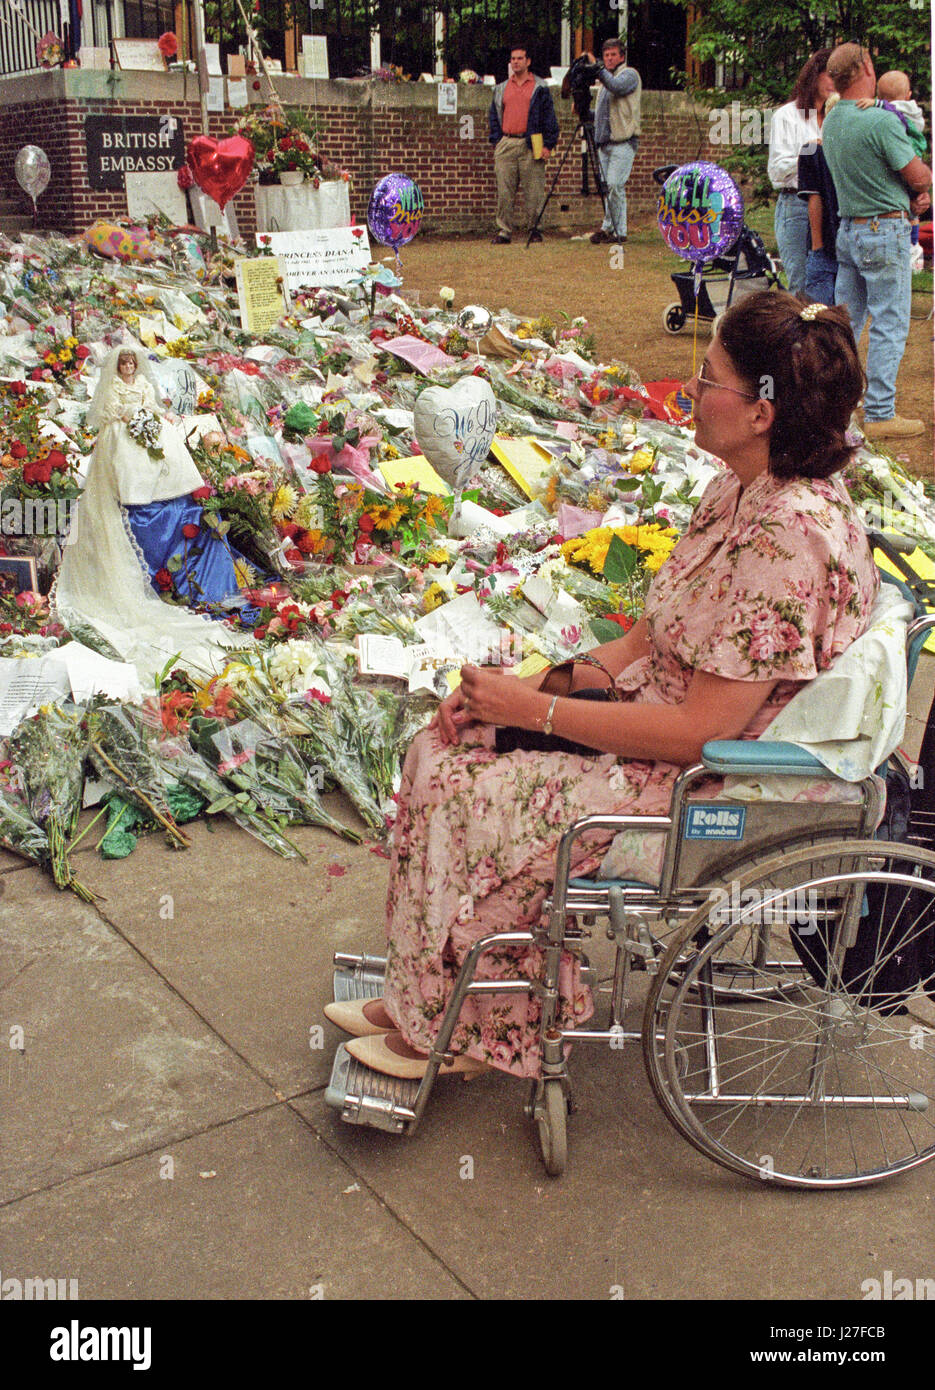 Danette Byrne of Hampstead, MD looks at the flowers and gifts left in tribute to the late Princess Diana while waiting for the British Embassy in Washington, DC to open to sign the Book of Condolence for Princess Diana on September 6, 1997. Danette owns the 'Princess Diana Bride Doll' seen at left and wanted to display it at the embassy in tribute to the late Princess. The Princess was killed in a car crash in Paris, France. Credit: Ron Sachs / CNP - NO WIRE SERVICE- Photo: Ron Sachs/Consolidated News Photos/Ron Sachs - CNP Stock Photo